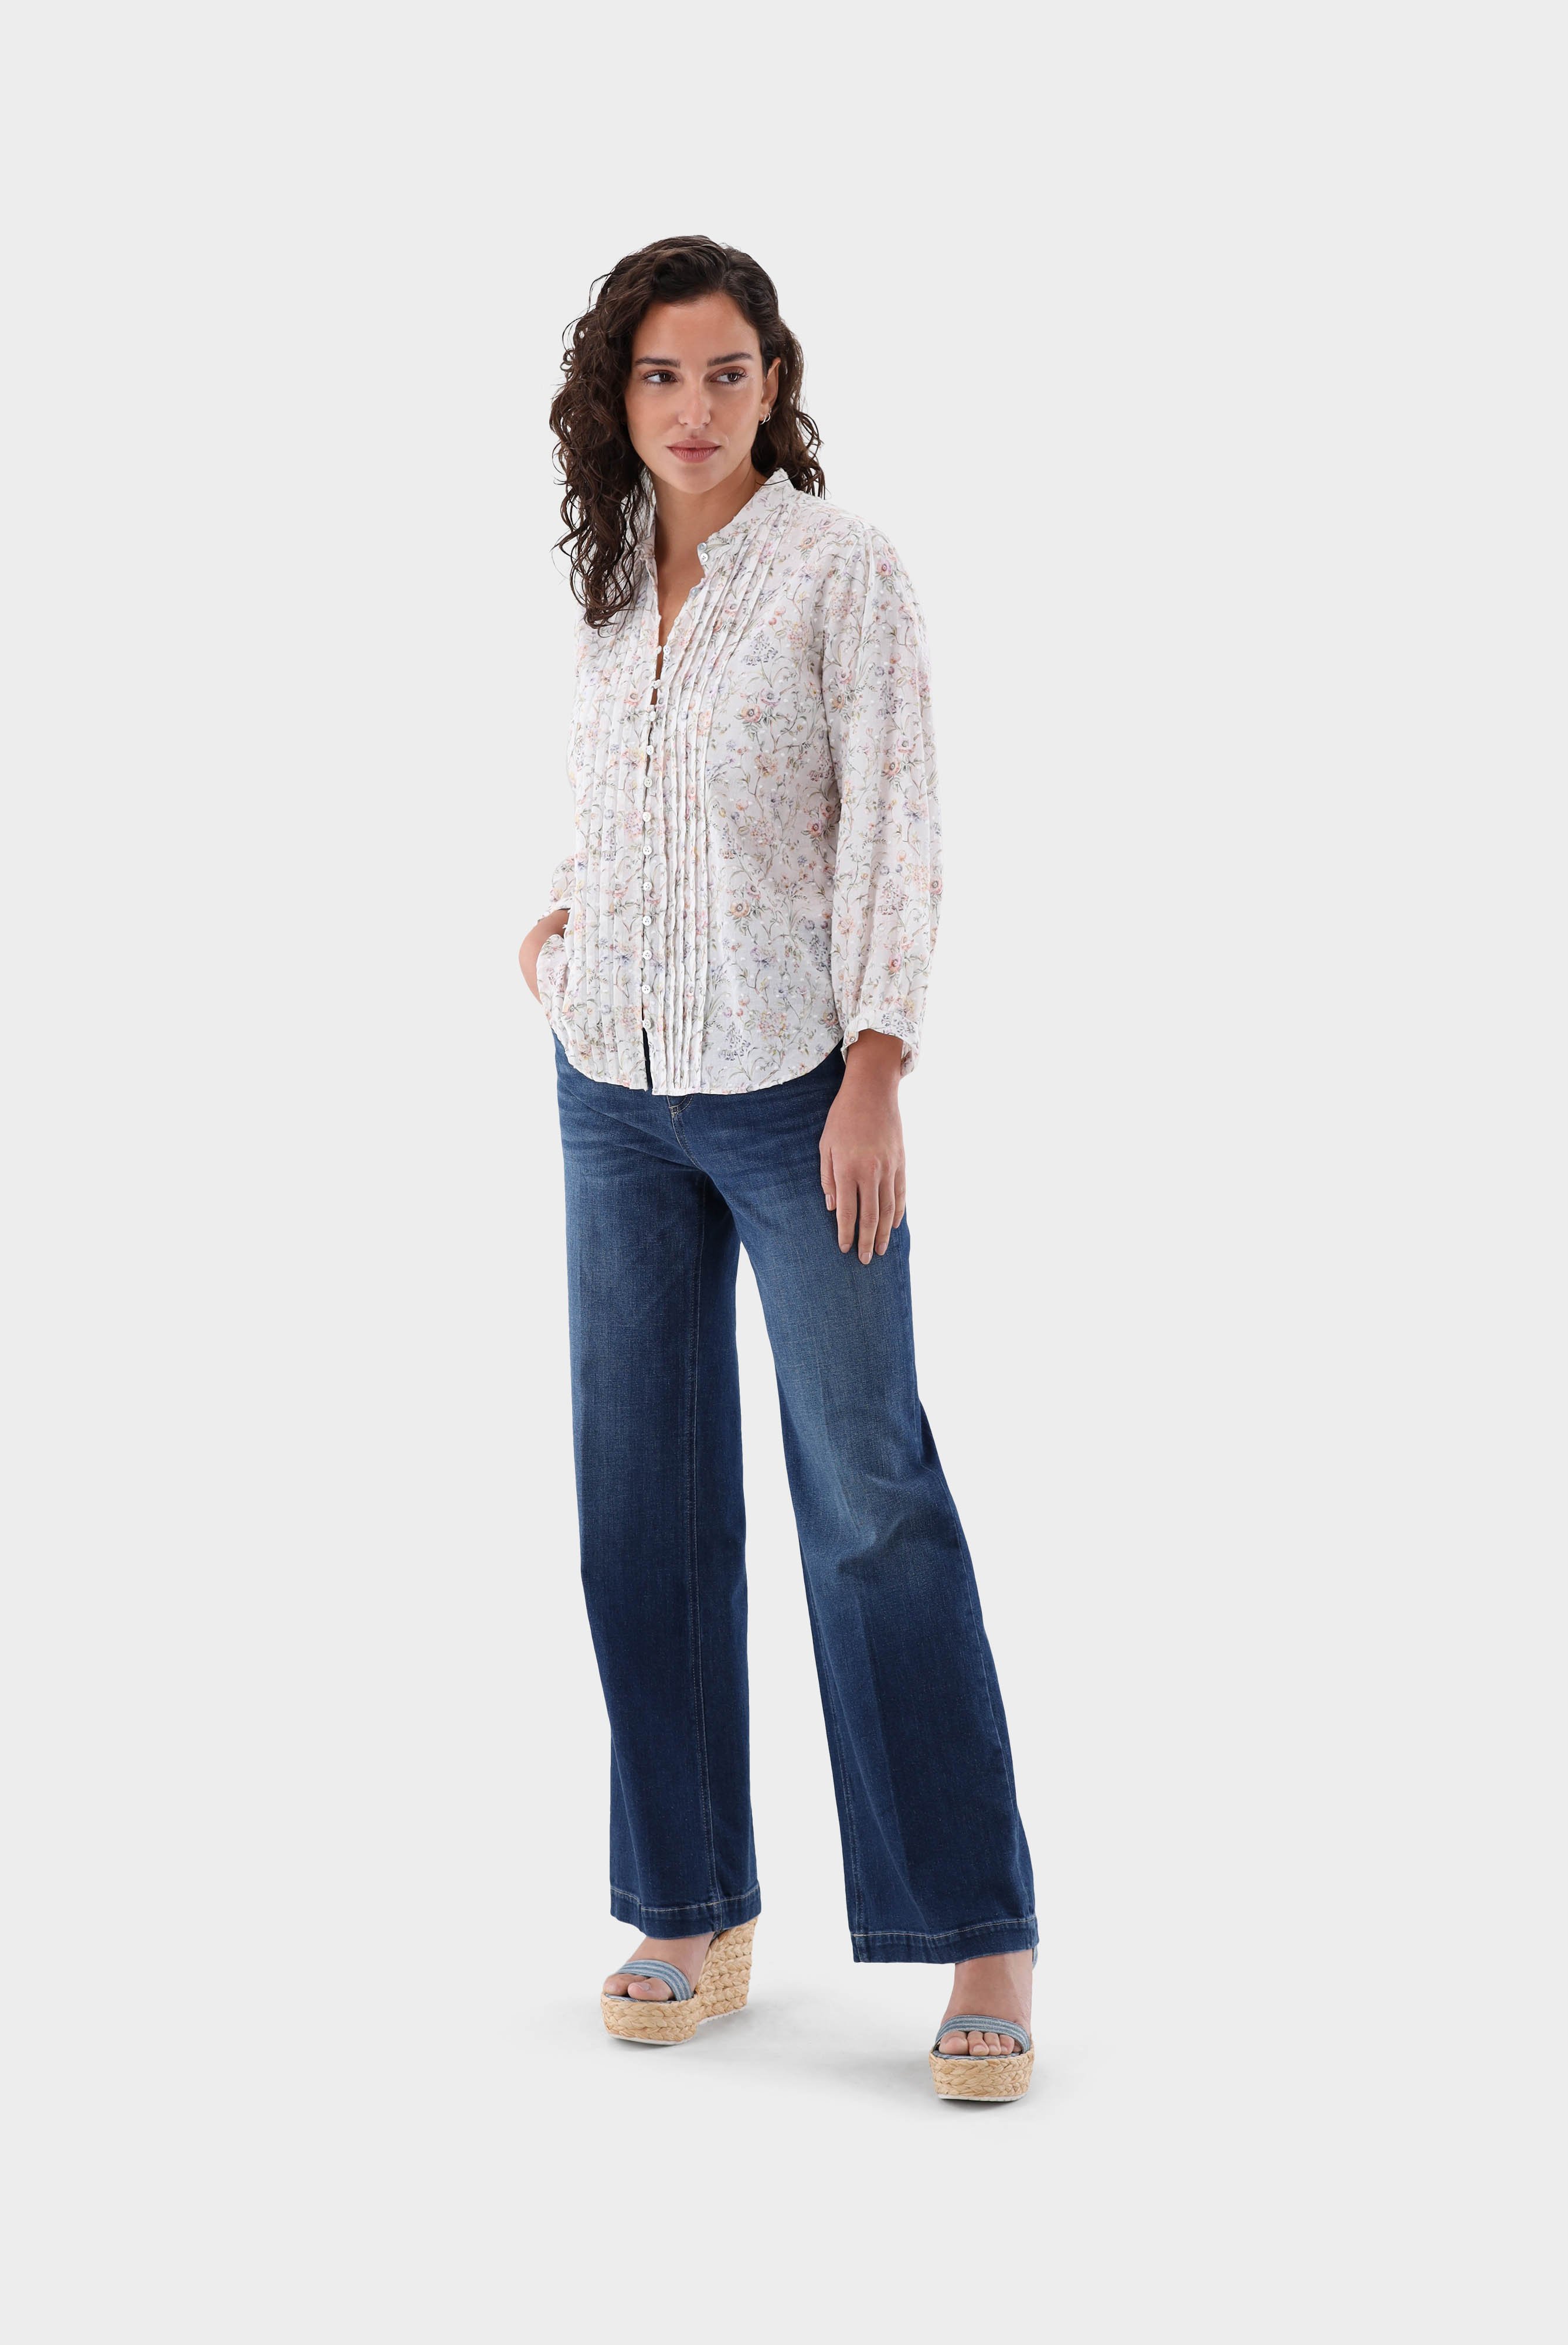 Casual Blouses+Stand-up collar blouse with pintucks at the front+05.528K.P8.170155.117.34